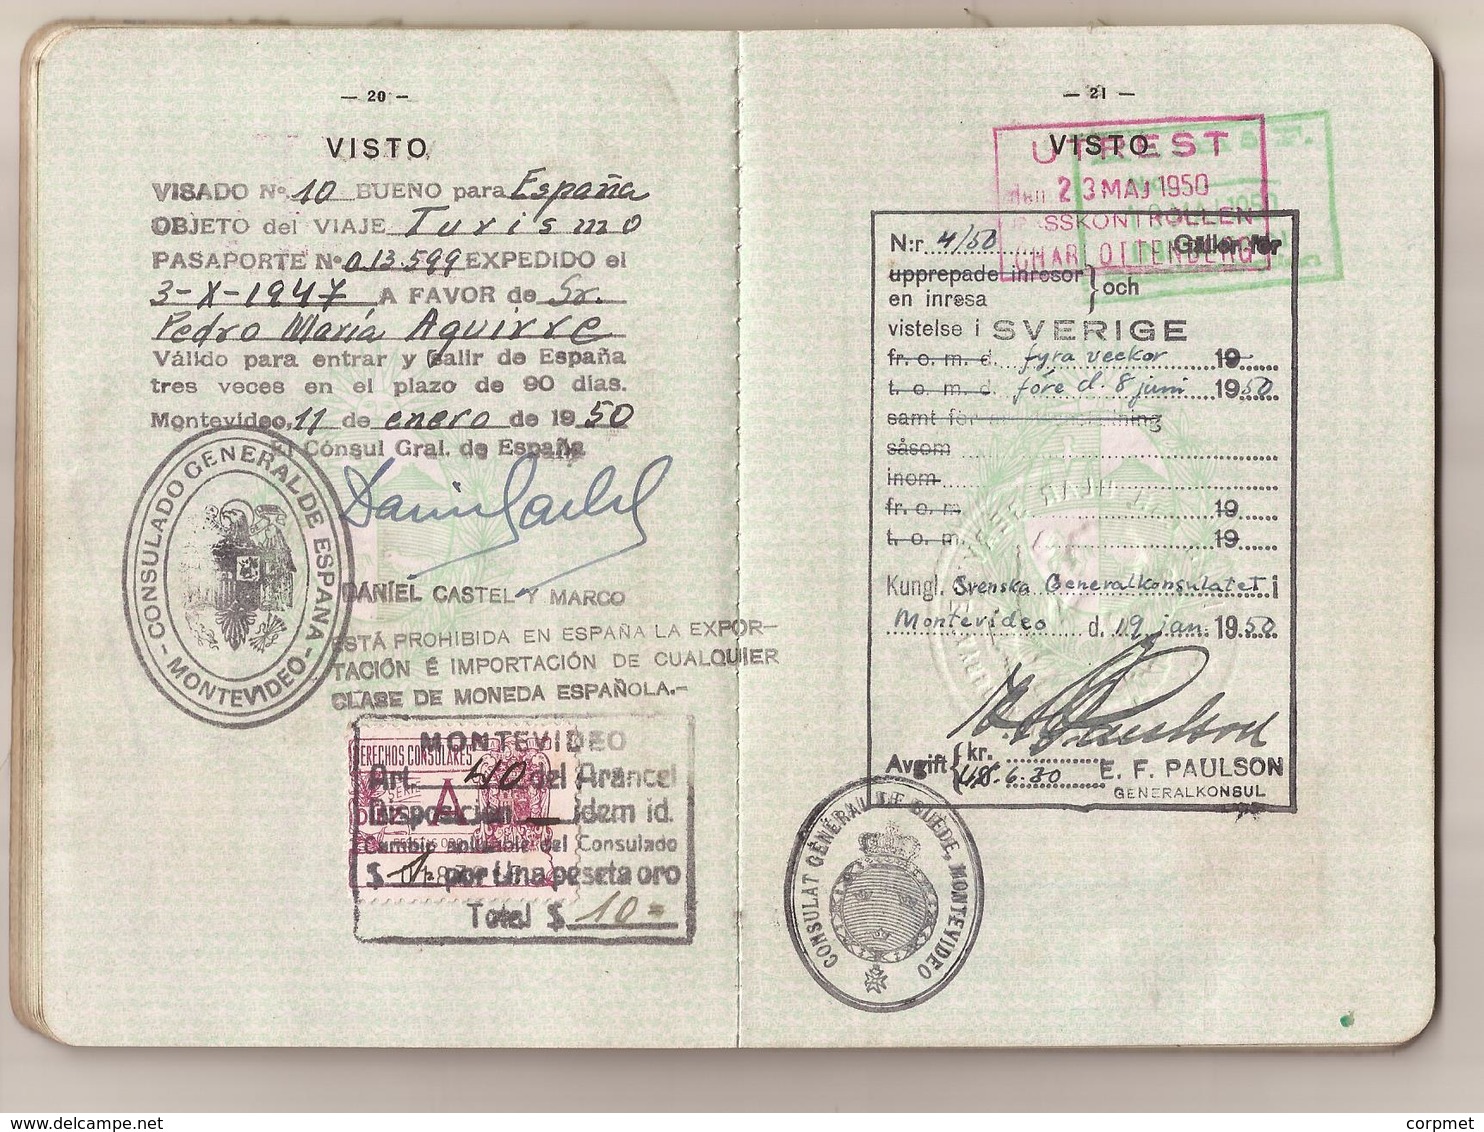 URUGUAY 1947 PASSPORT- PASSEPORT -multiple VISAS and STAMPS - includes US, BRITISH, FRENCH zone of GERMANY visas+revenue